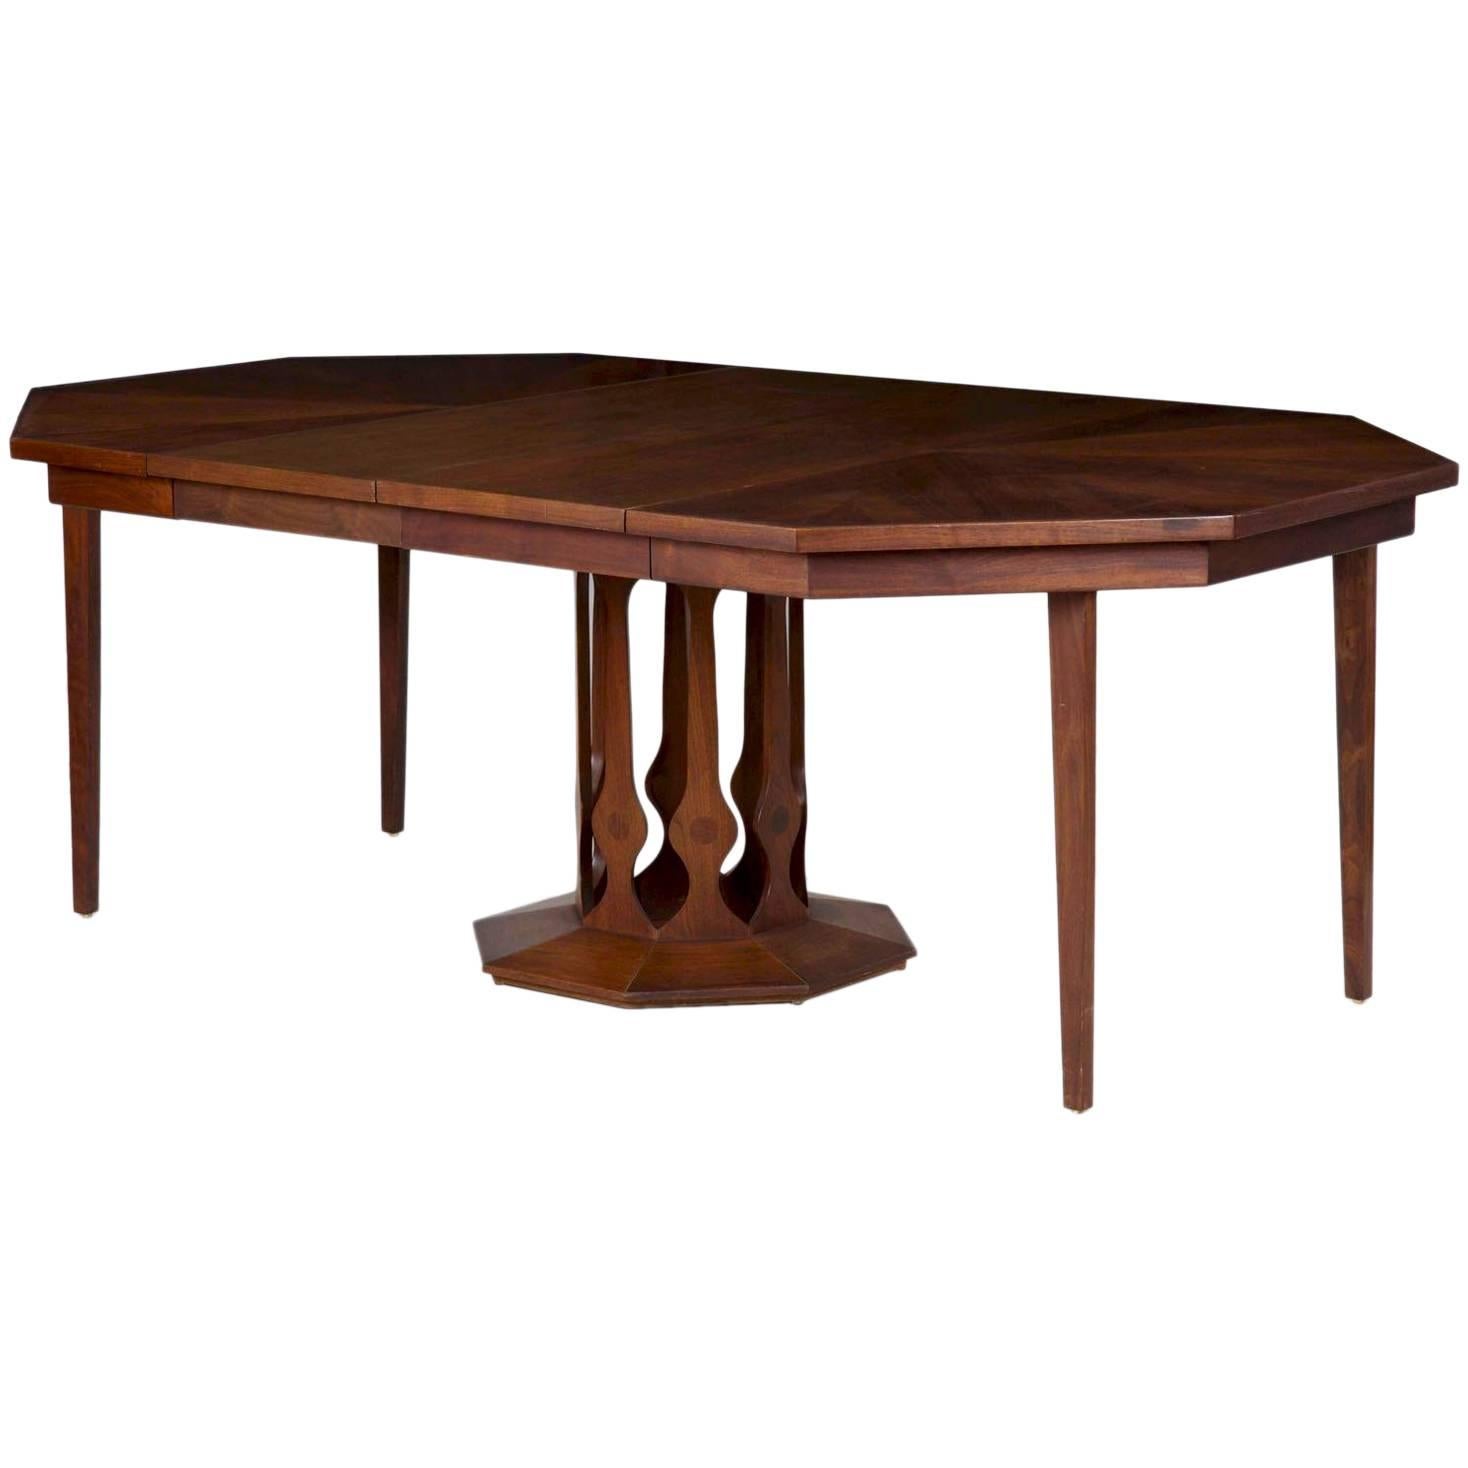 "Intaglio" Faceted Octagon Inlaid Walnut Dining Table by Foster-McDavid